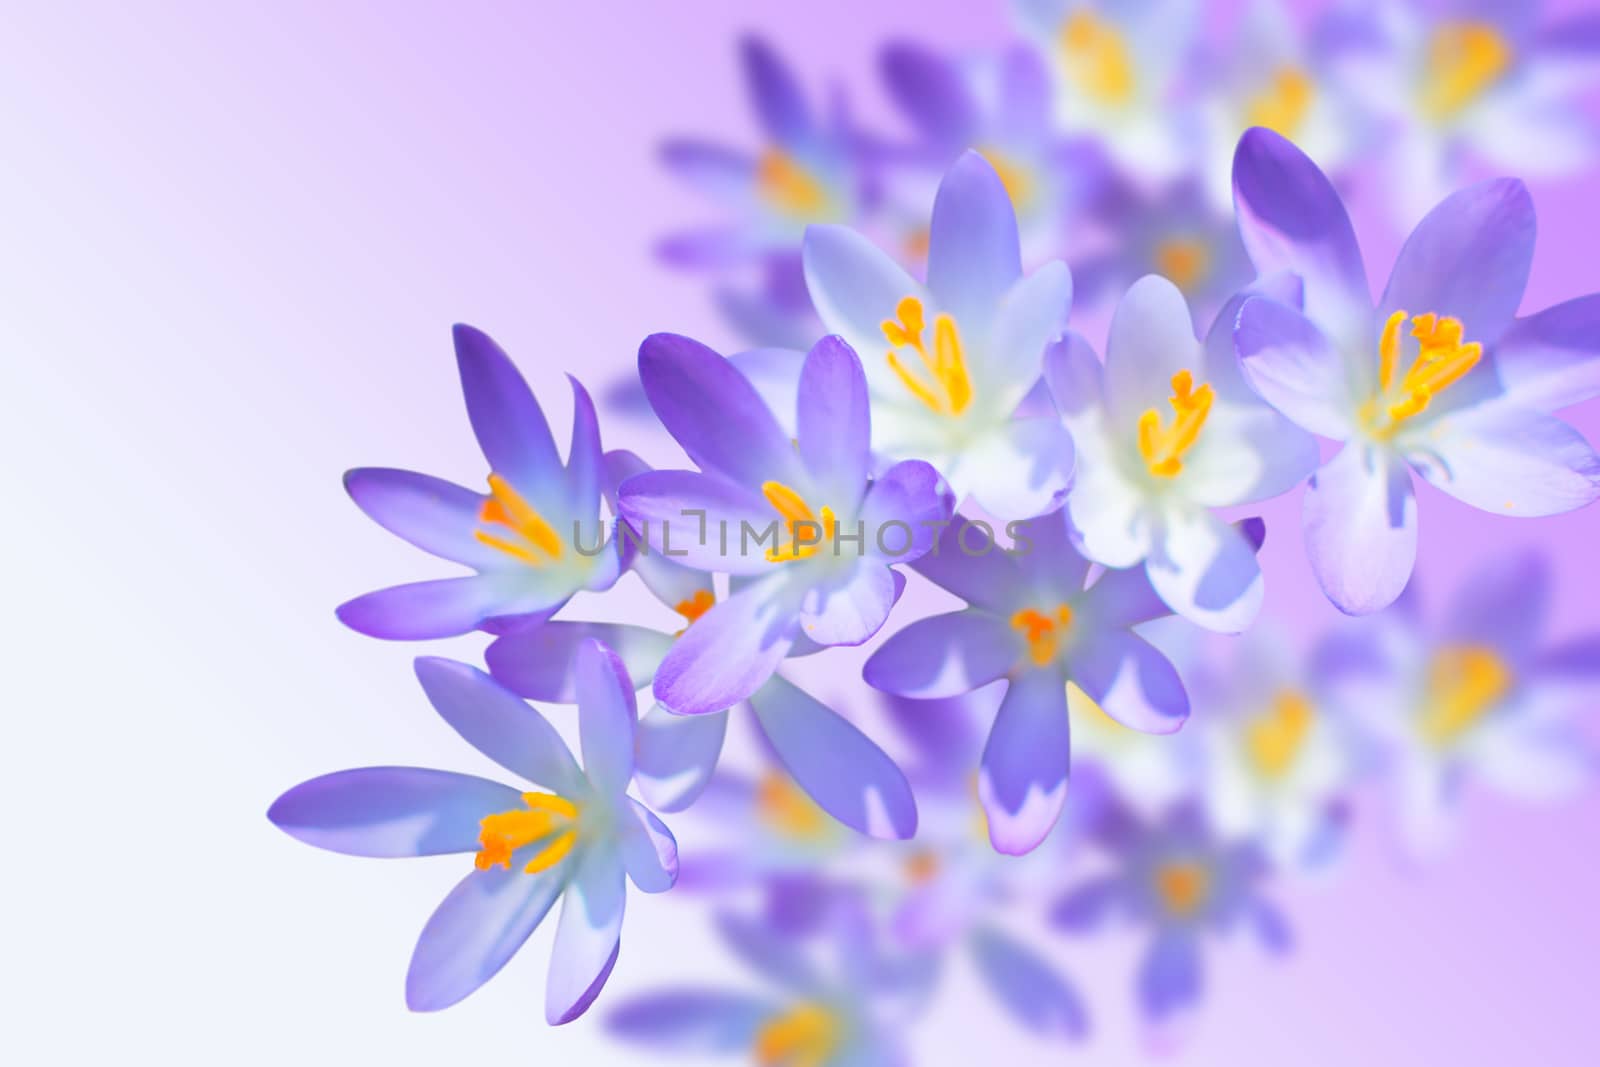 Alpine crocuses tender spring flowers on blurred background with free copy-space place for your text